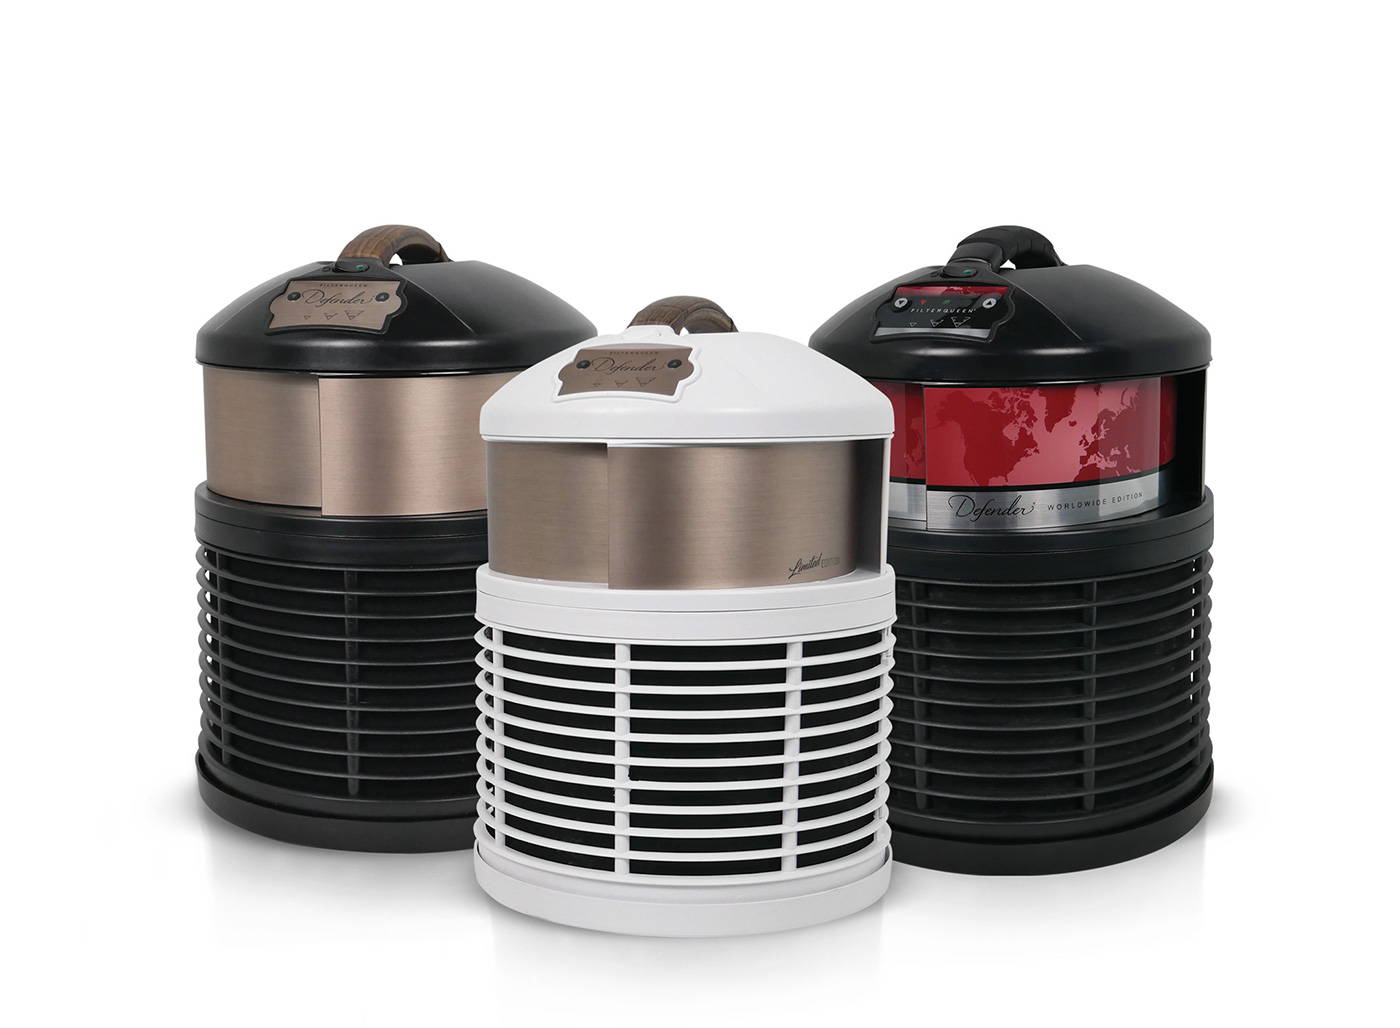 defender air purifier in three colors